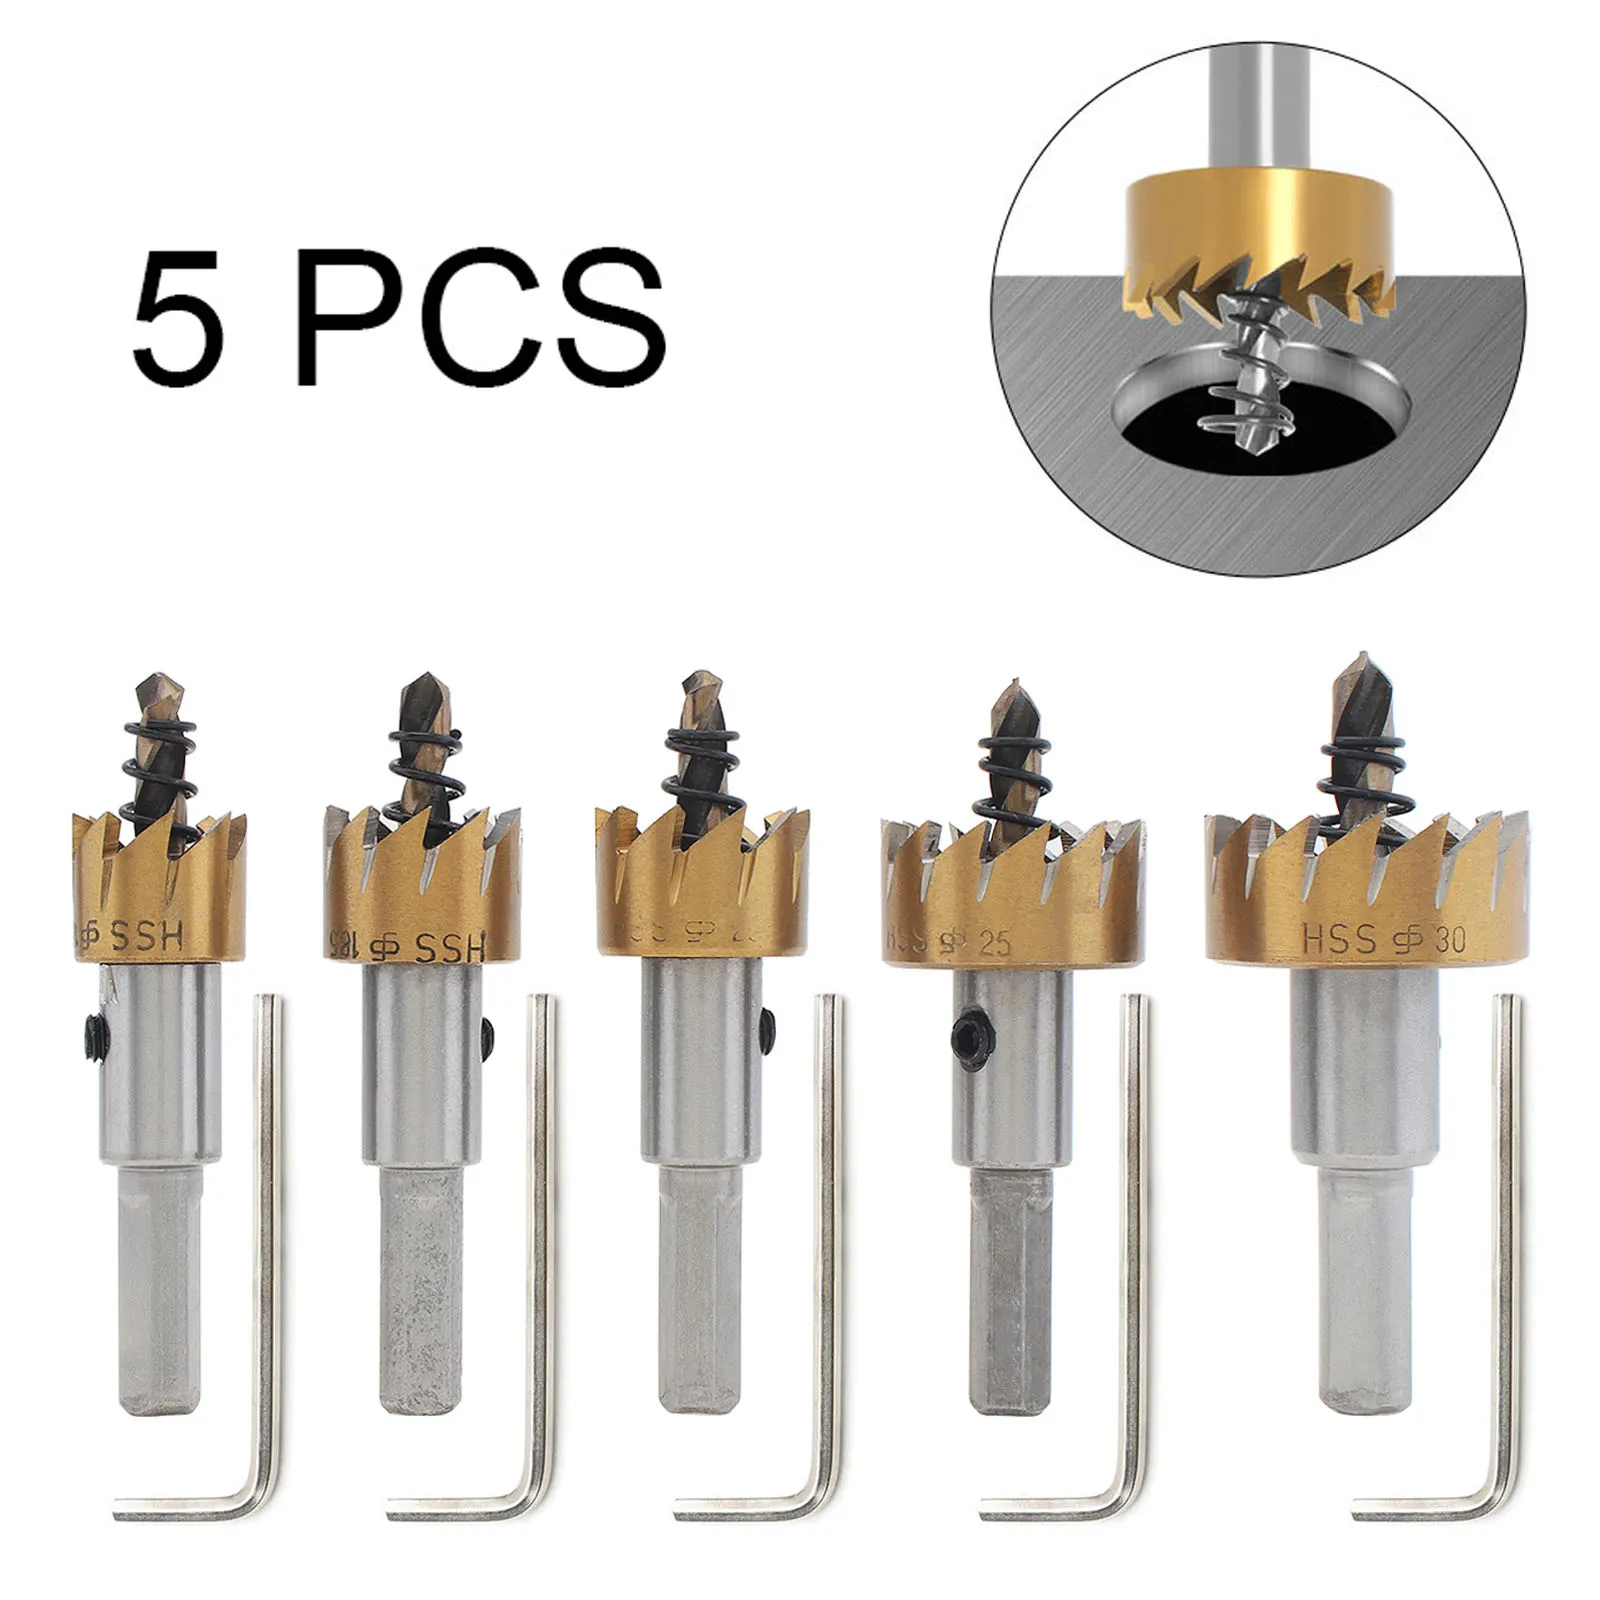 5pcs M35 Hole Saw Drill Bit Set HSS Titanium Plated M35 High Speed Steel Hole Opener Kit Cutting Metal Plastic Wood Iron Plate 3 13mm 11 steps reaming drill 4214 high speed steel mahua bit steel plate hole opener electric drill tool hole saw multiuse tool